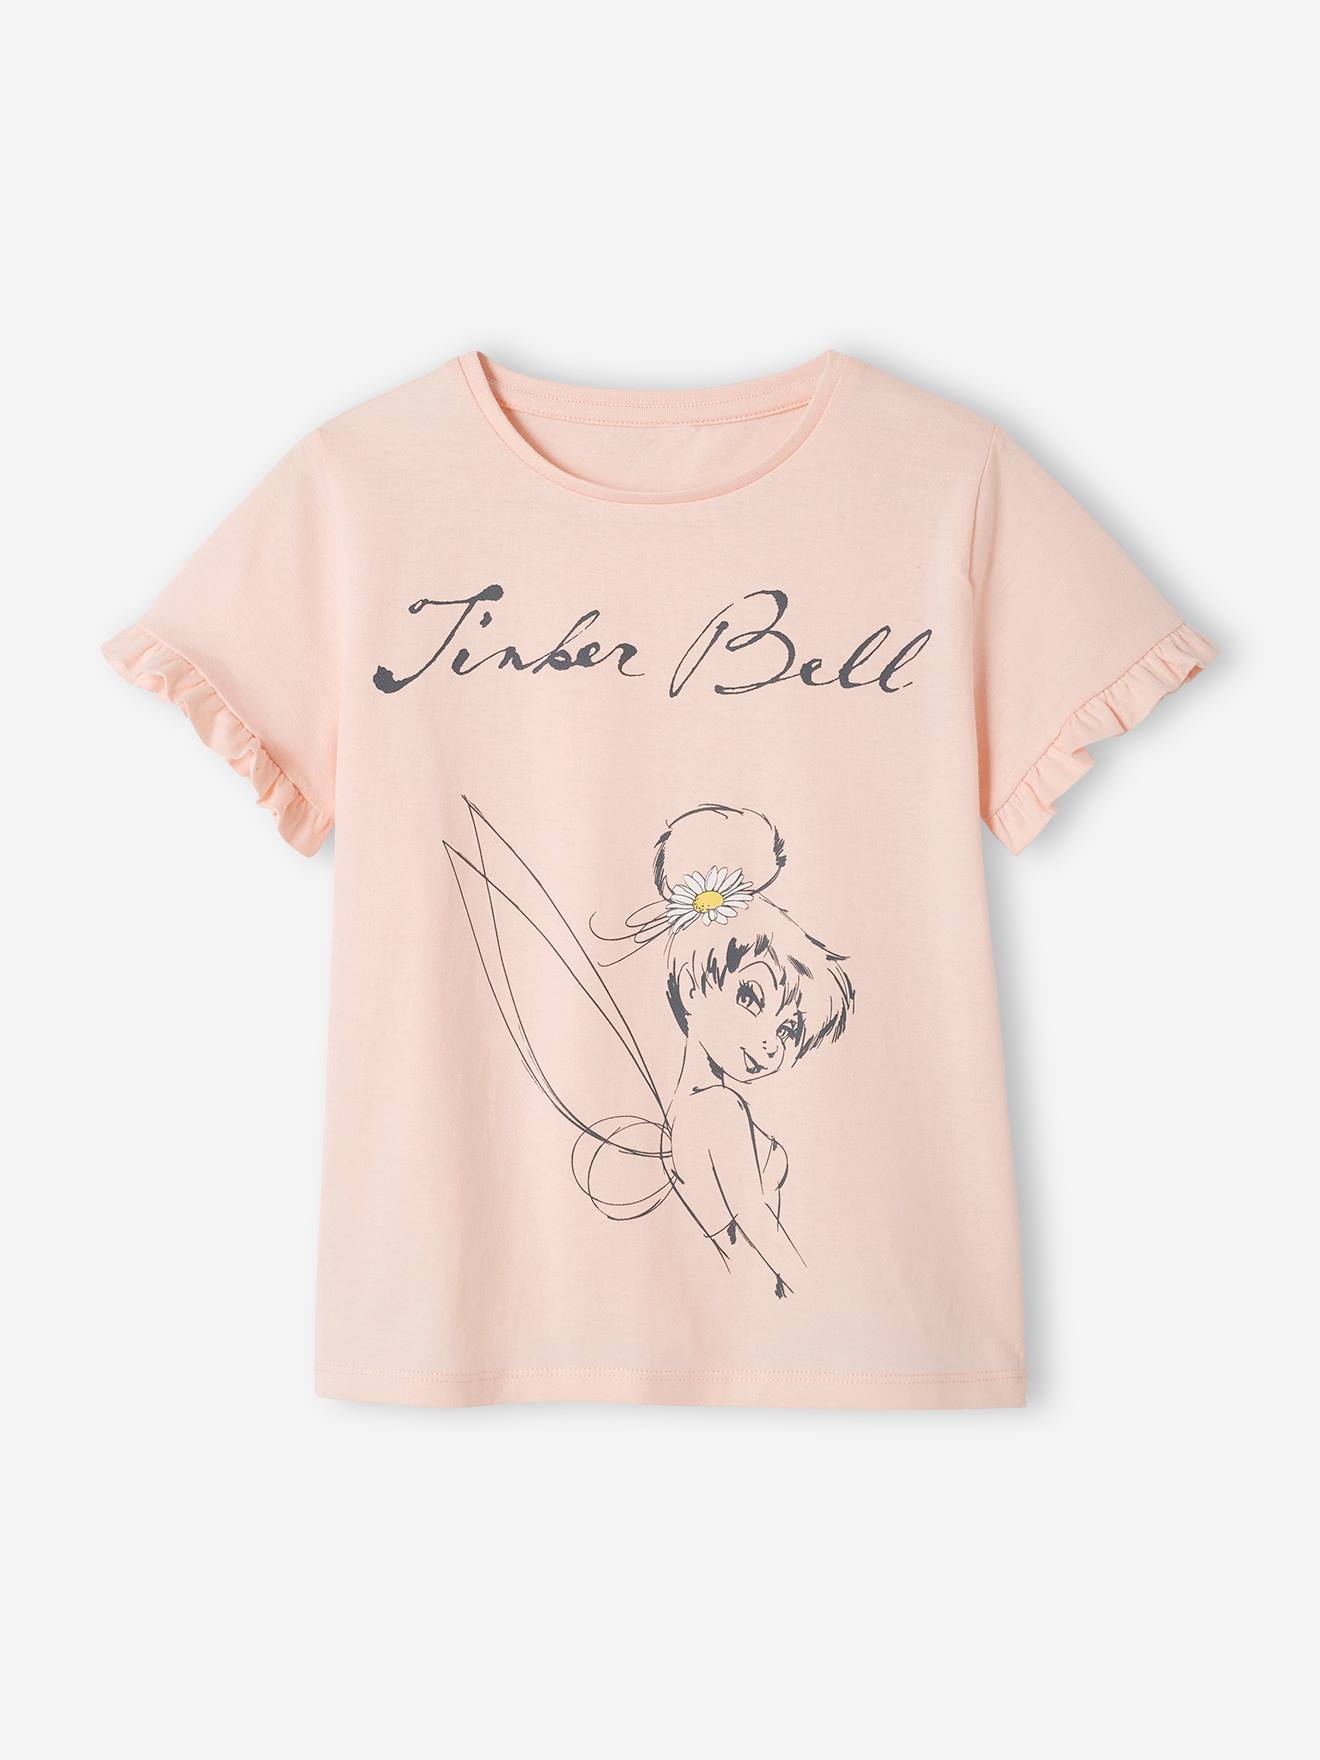 Tinkerbell T-Shirt with Short Frilly Sleeves for Girls, by Disney(r)